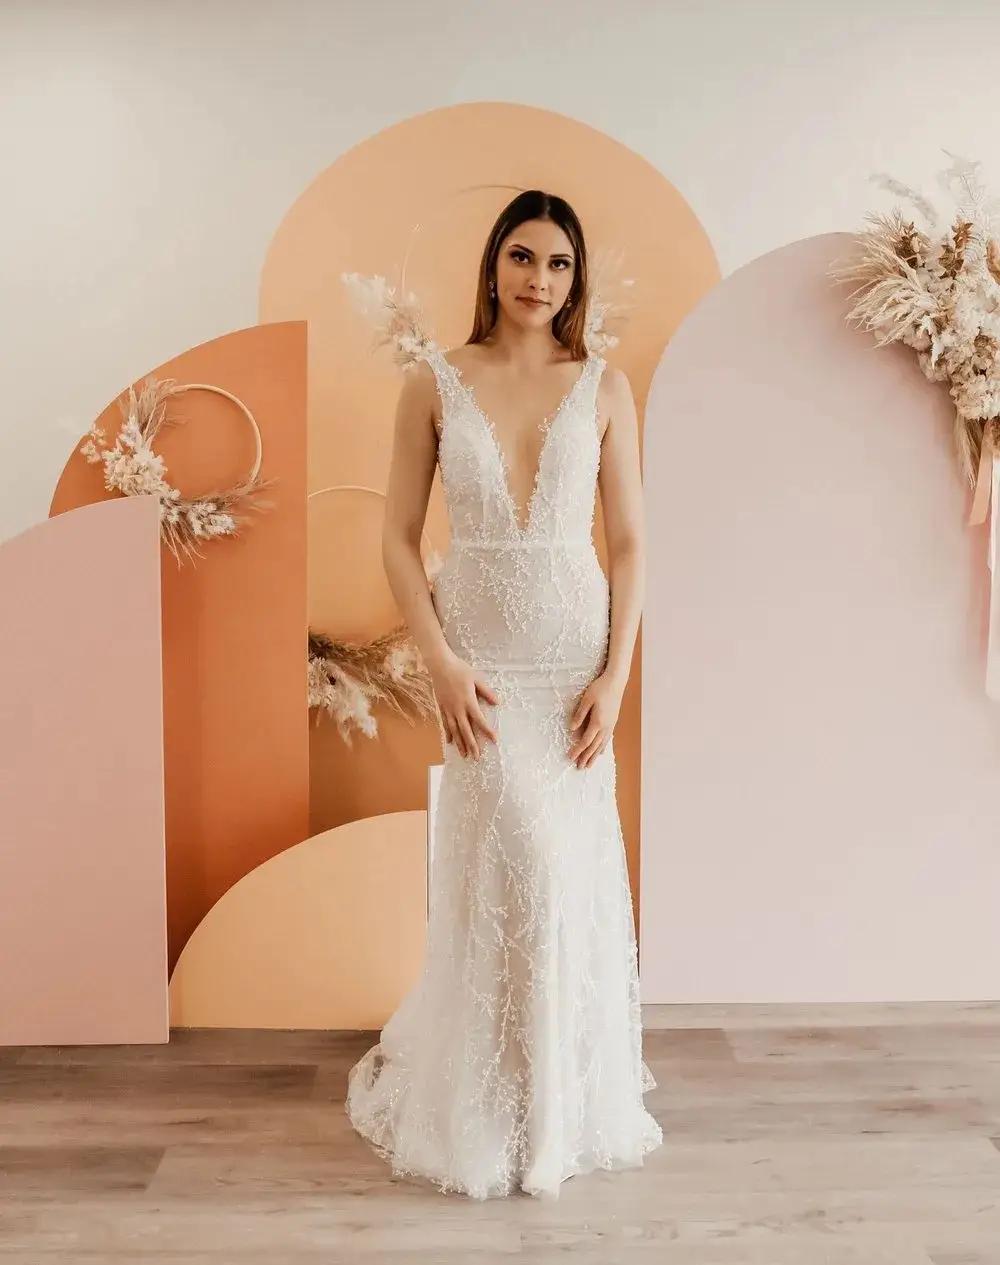 Bridal Trends in 2022 Image